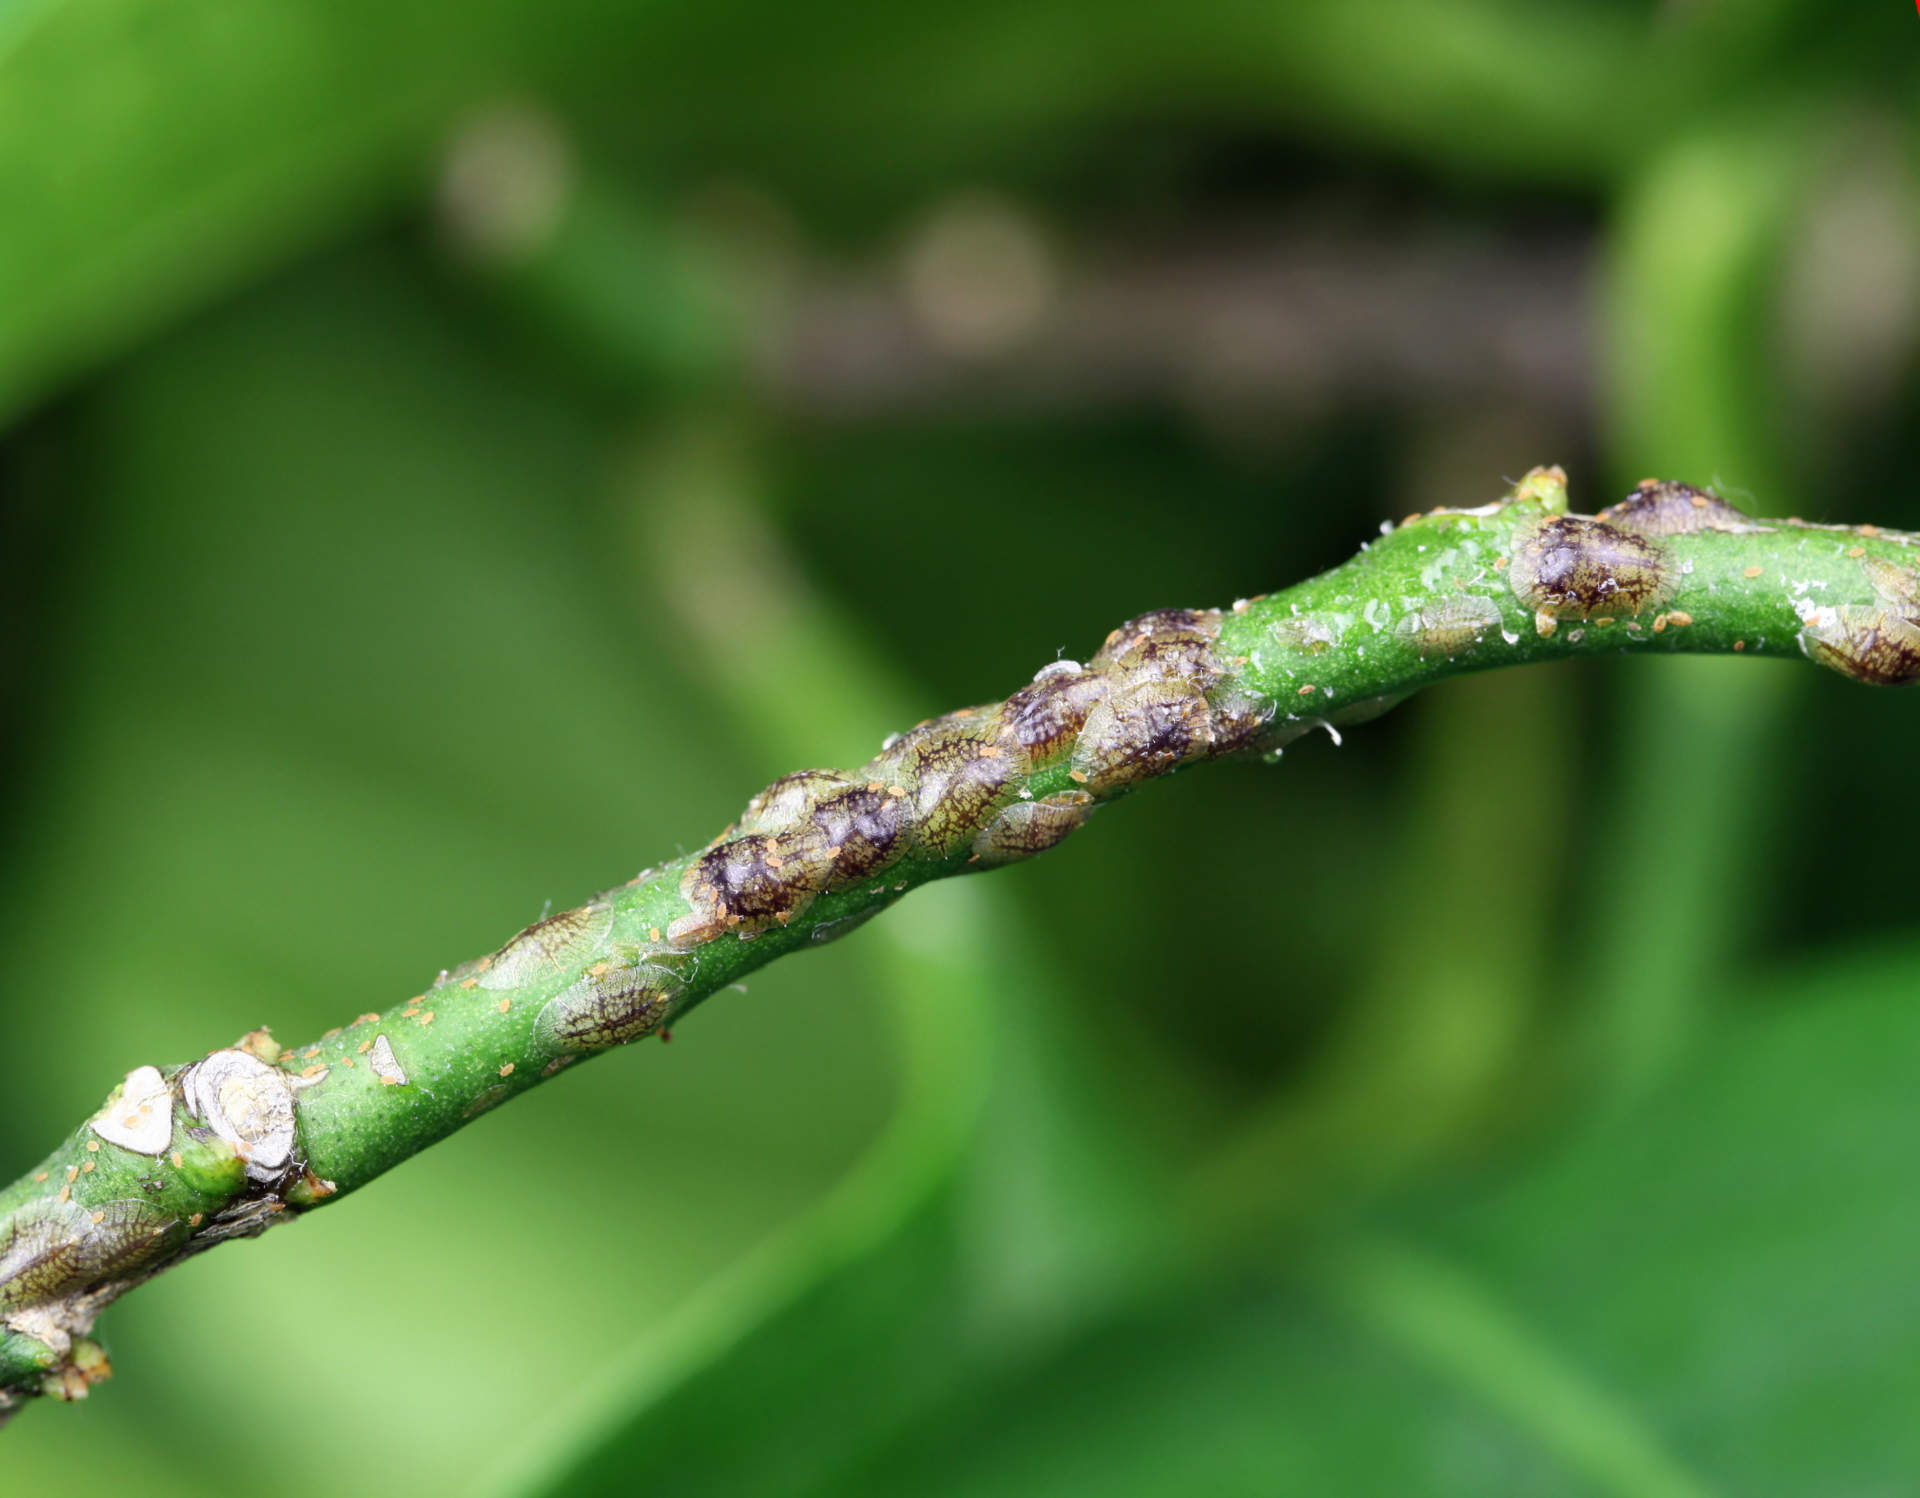 https://www.gardentech.com/-/media/project/oneweb/gardentech/images/pest-id/updated-bug-post/scale-insect/citrus-infested-by-pests.jpg